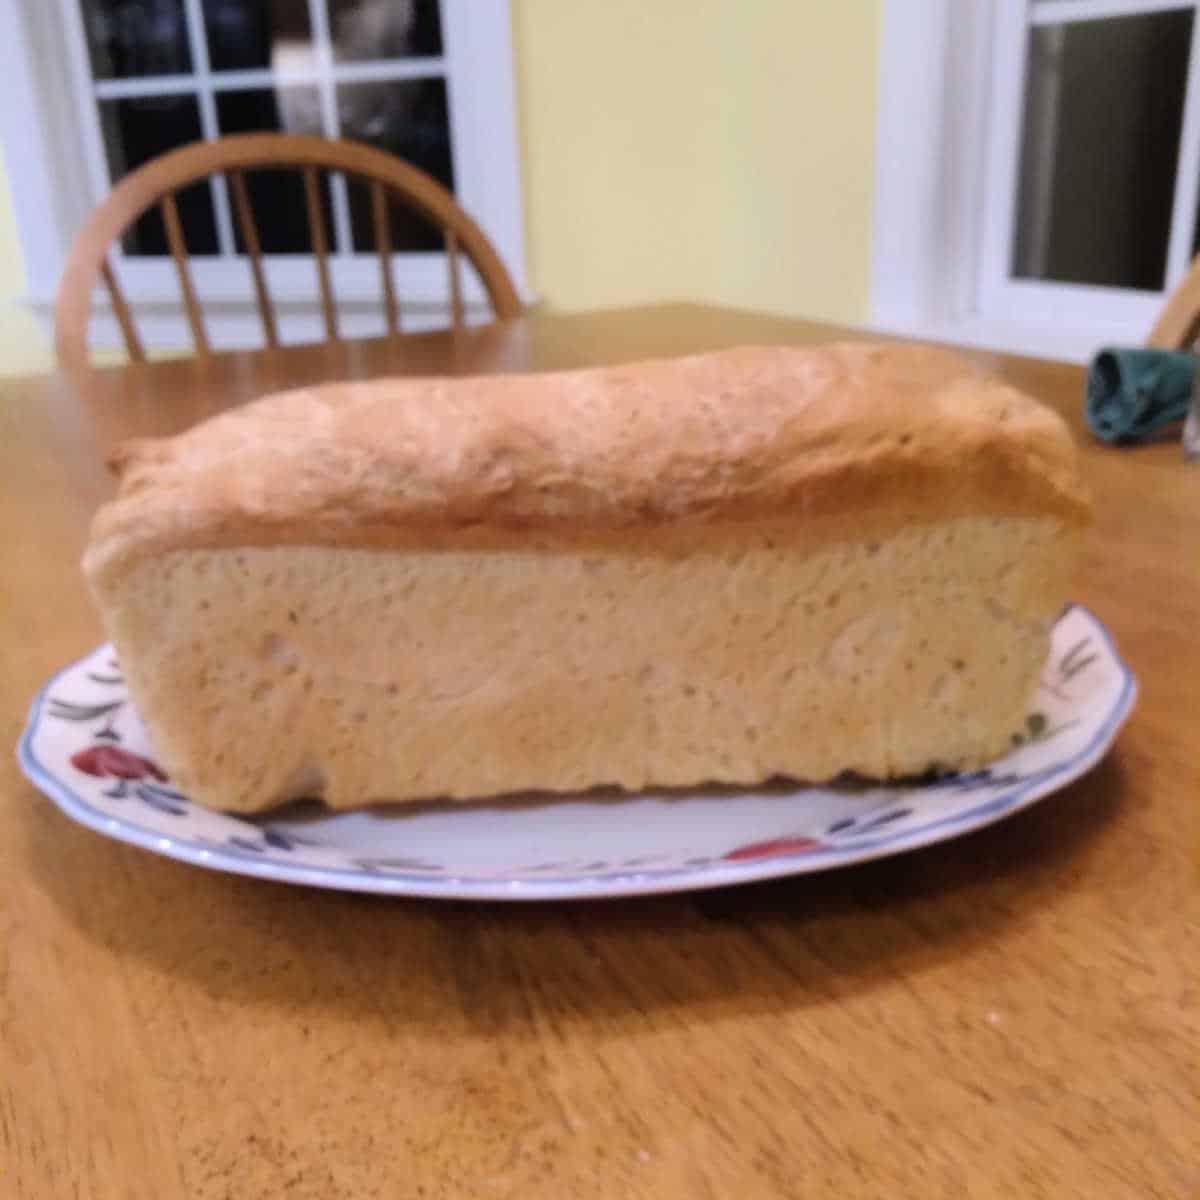 A loaf of bread on a plate